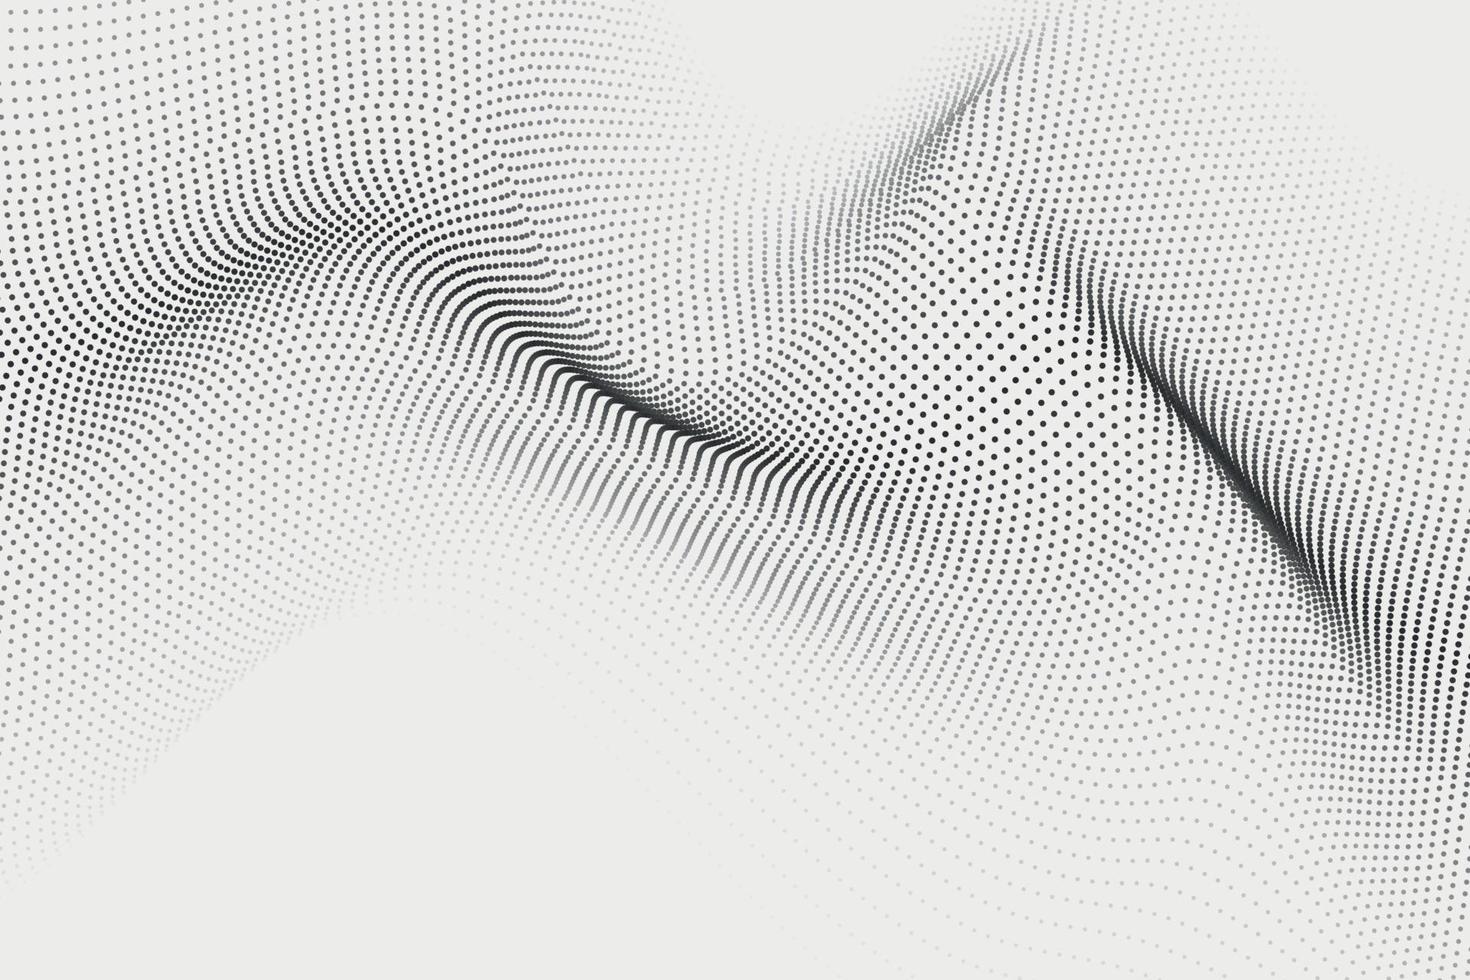 Abstract wavy particles on white background in futuristic style with scientific motives vector